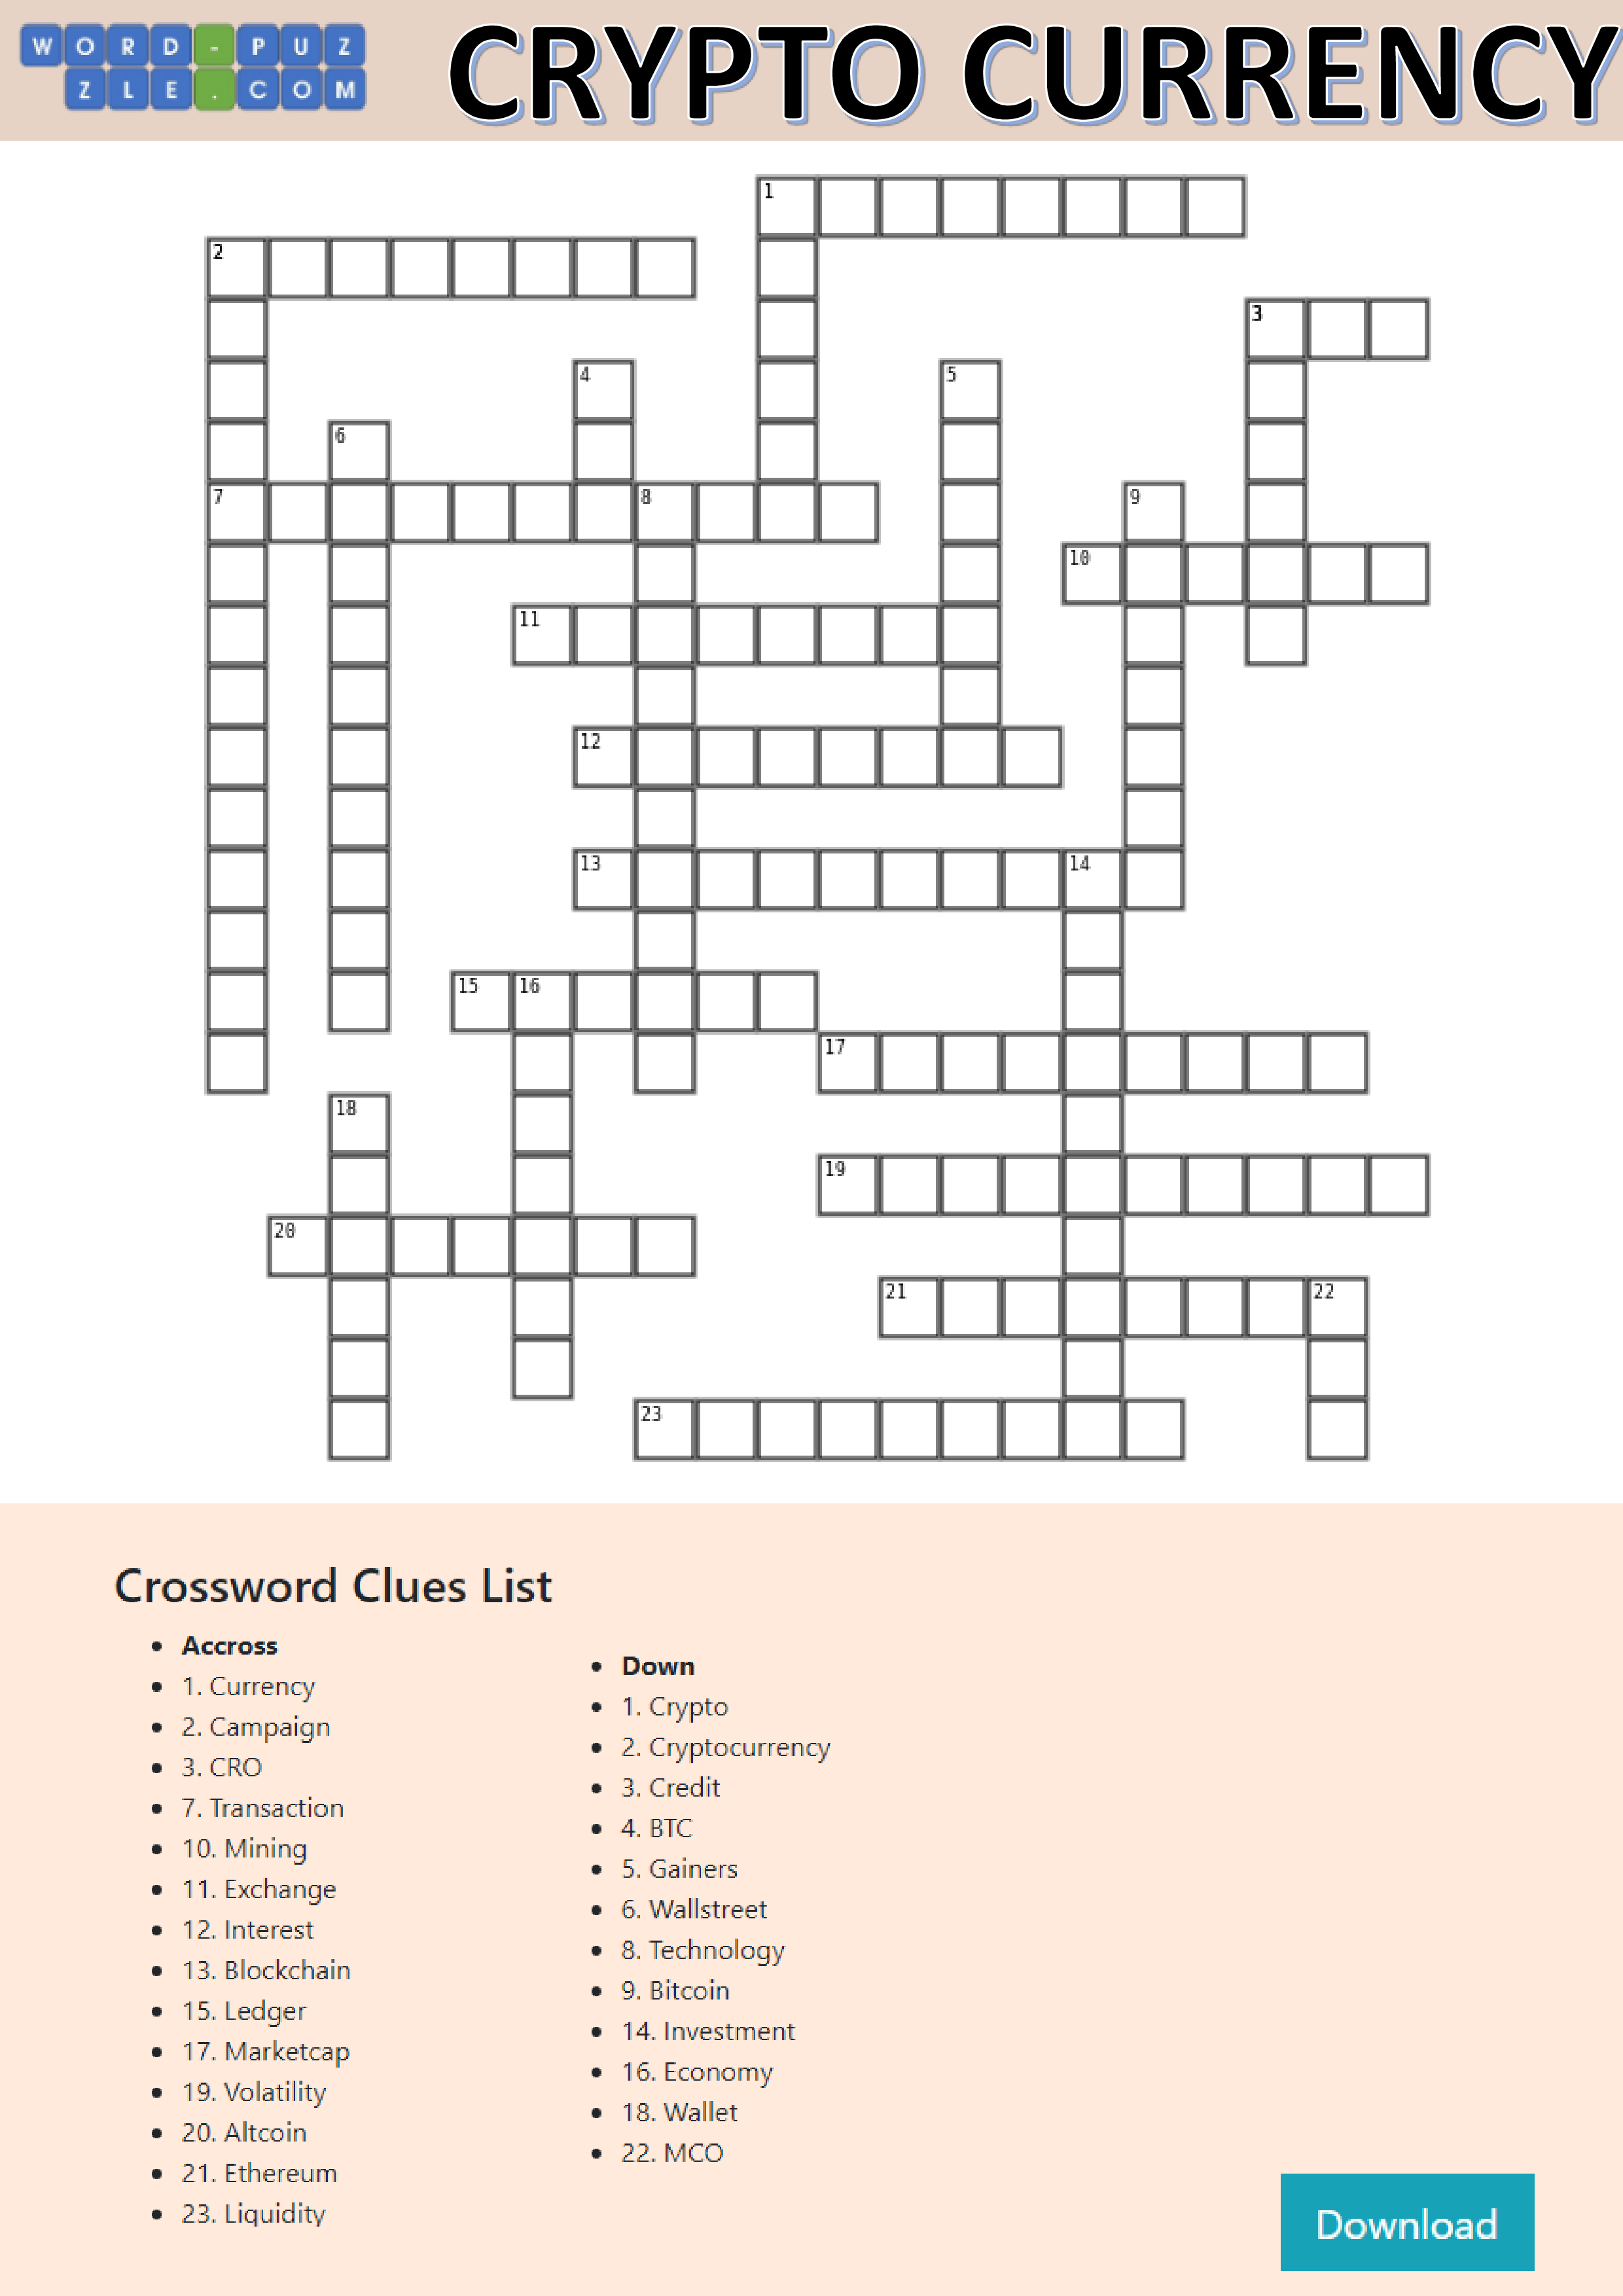 Cryptocurrency Crossword Puzzle main image